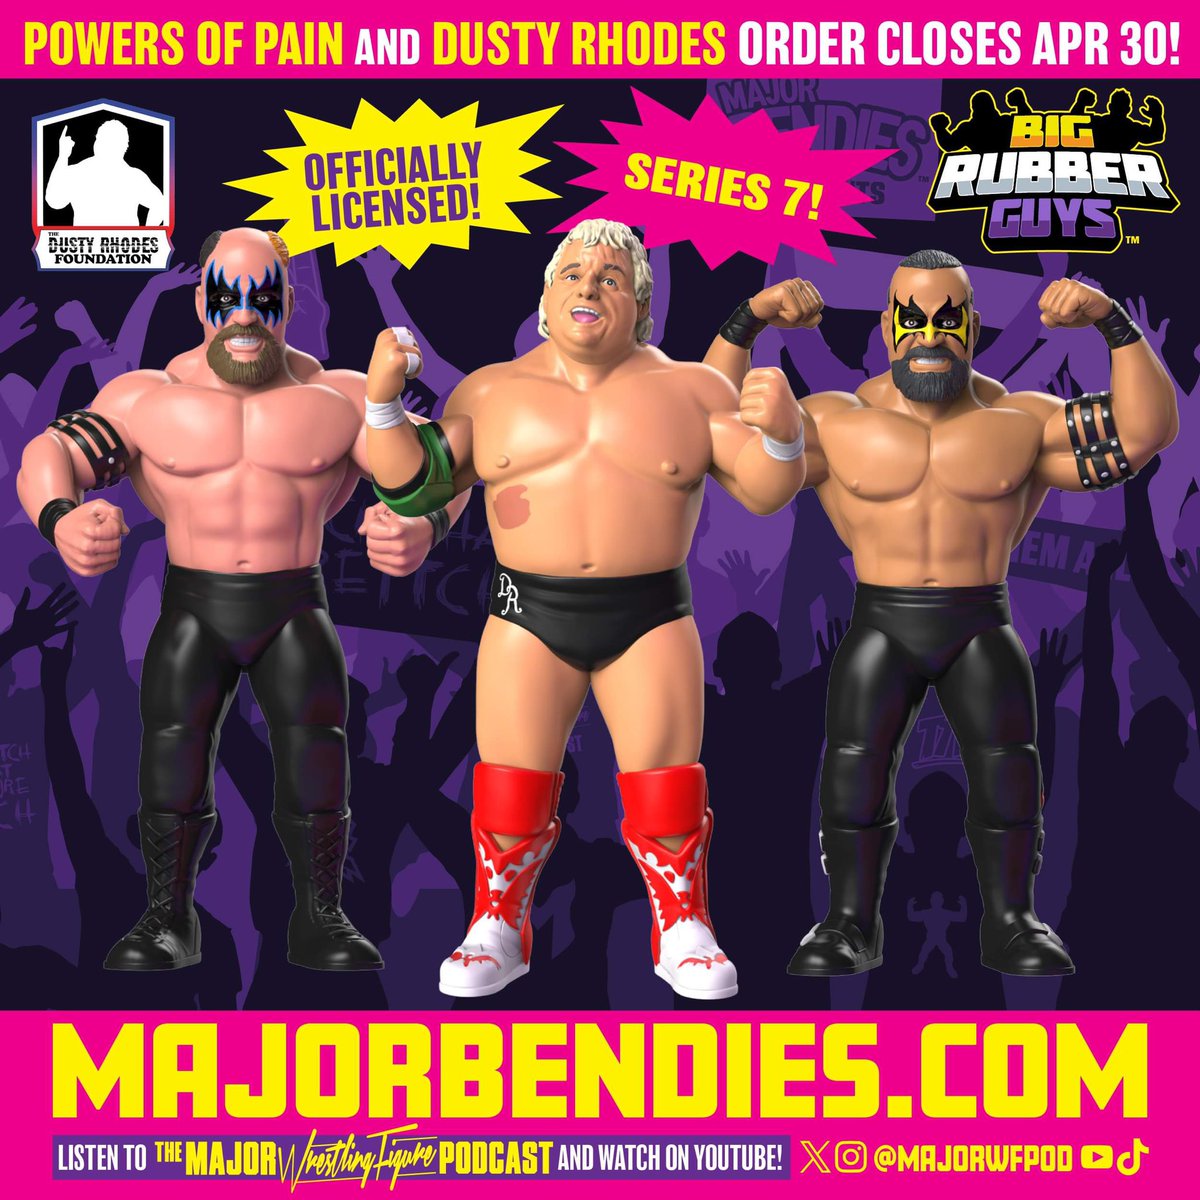 Powers of Pain…

Dusty Rhodes…

#BigRubberGuys are firing on all cylinders and you’re not going to want to miss out on these!

They will not be made available again from us after April 30th!

Get yours at MajorBendies.com before it’s too late!

#ScratchThatFigureItch